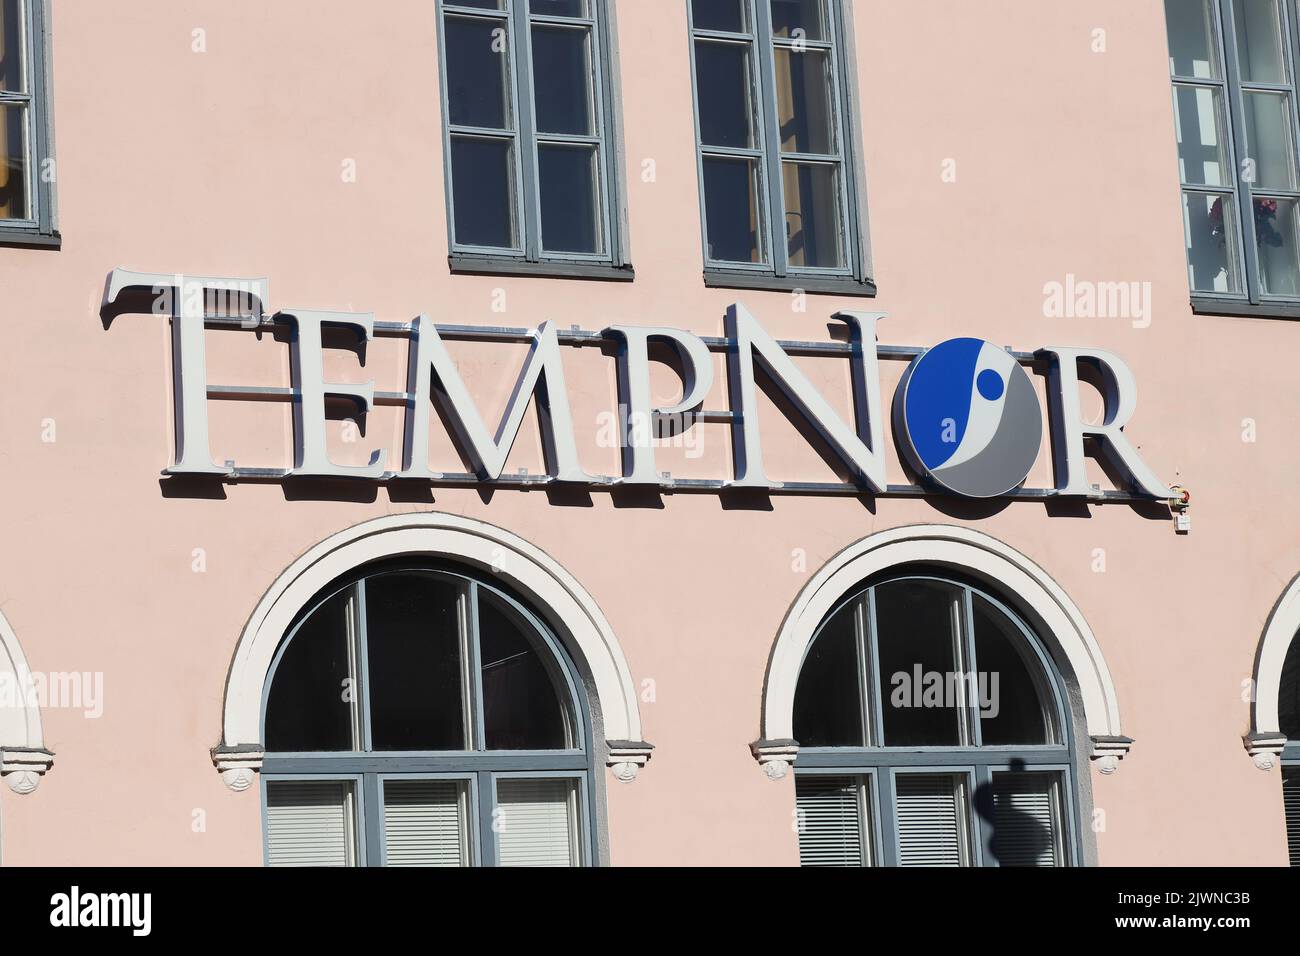 Tornio, Finland - August 29, 2022: The logo of the staff recruitment company Tempnor office. Stock Photo